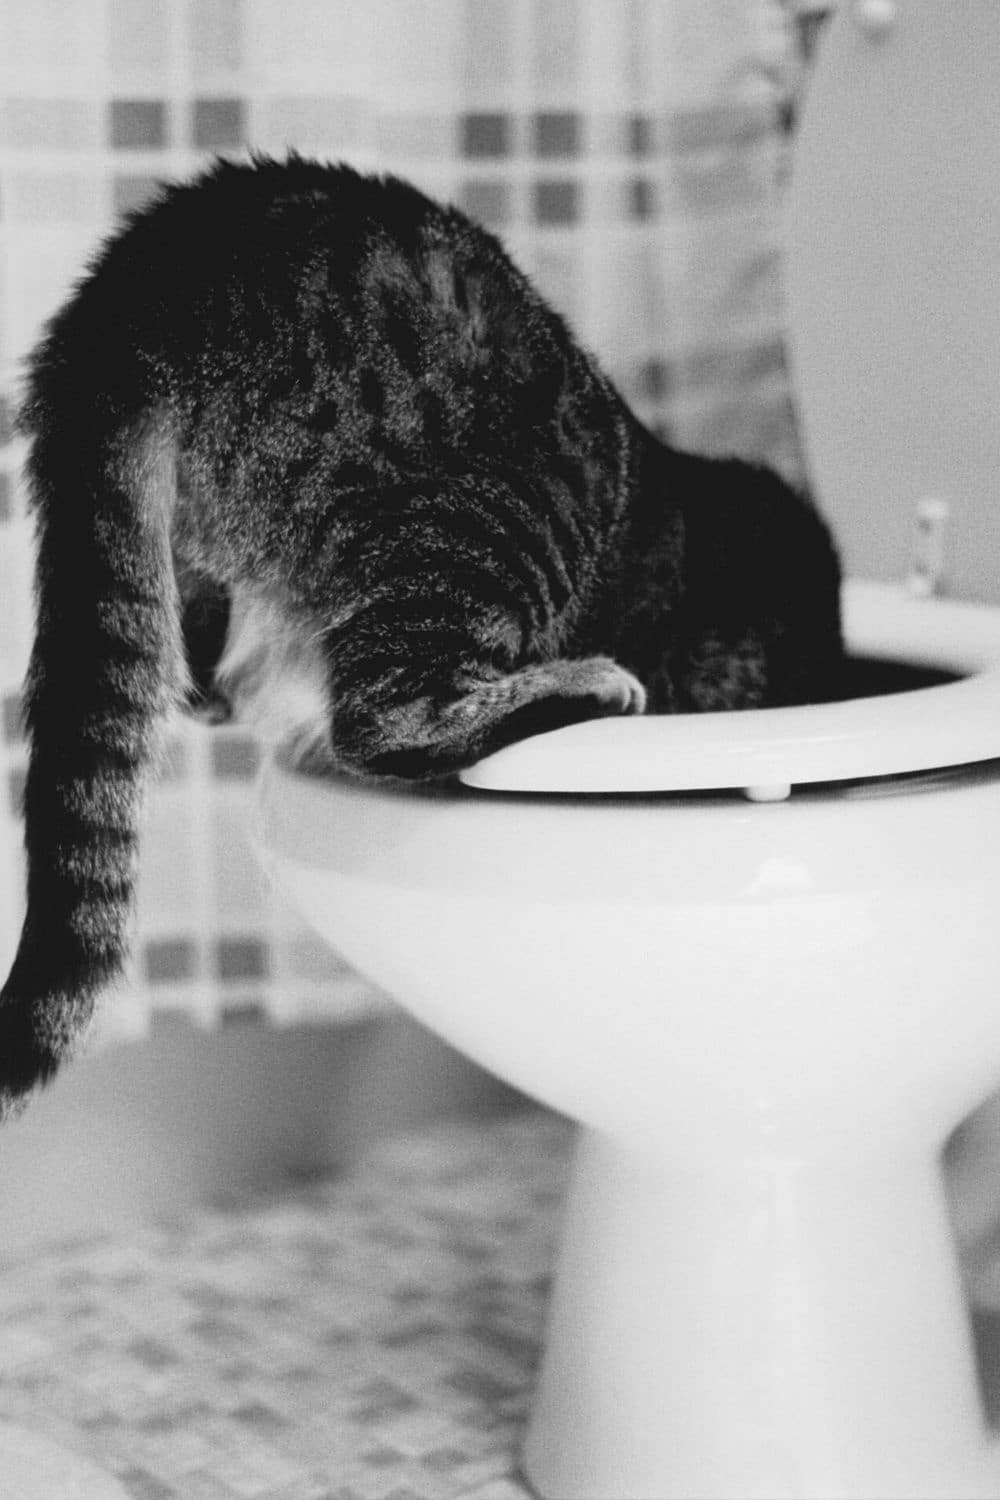 Since cats aren't natural drinkers, they'd prefer to drink from unnatural sources like the toilet rather than from a water bowl